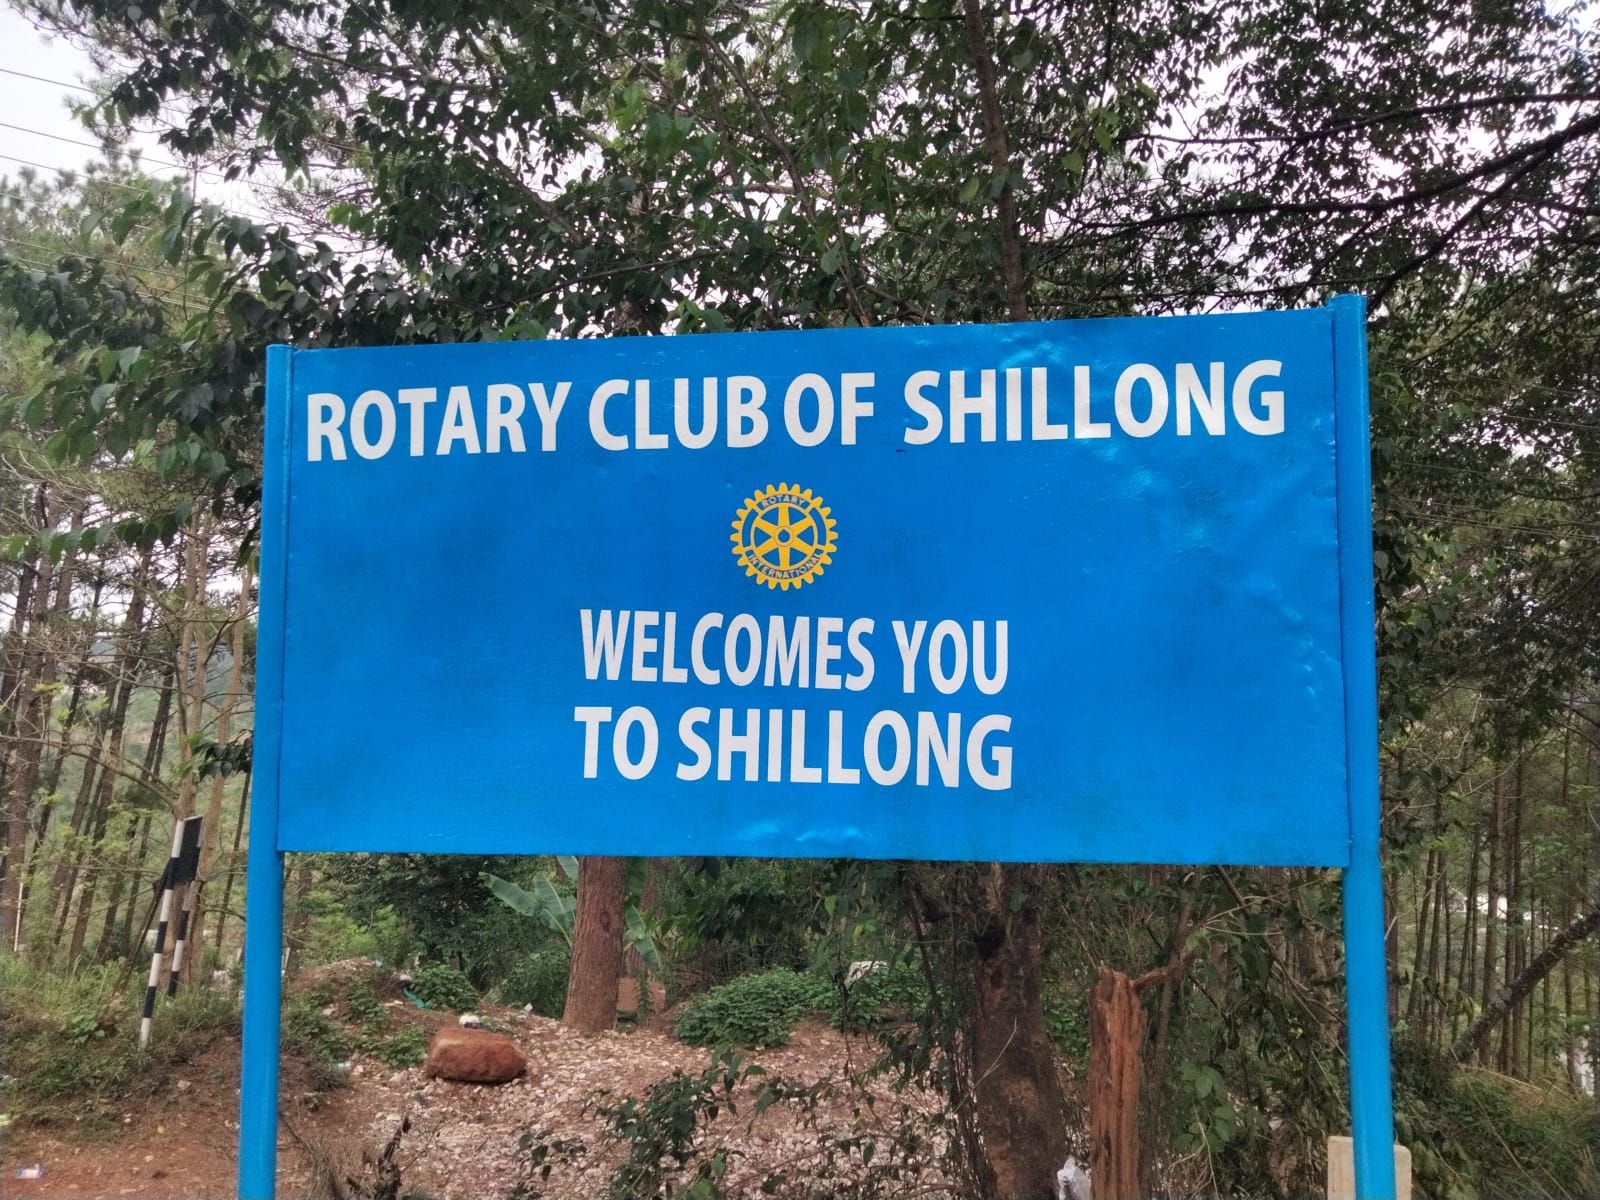 Branding/signage of Rotary Cub of Shillong